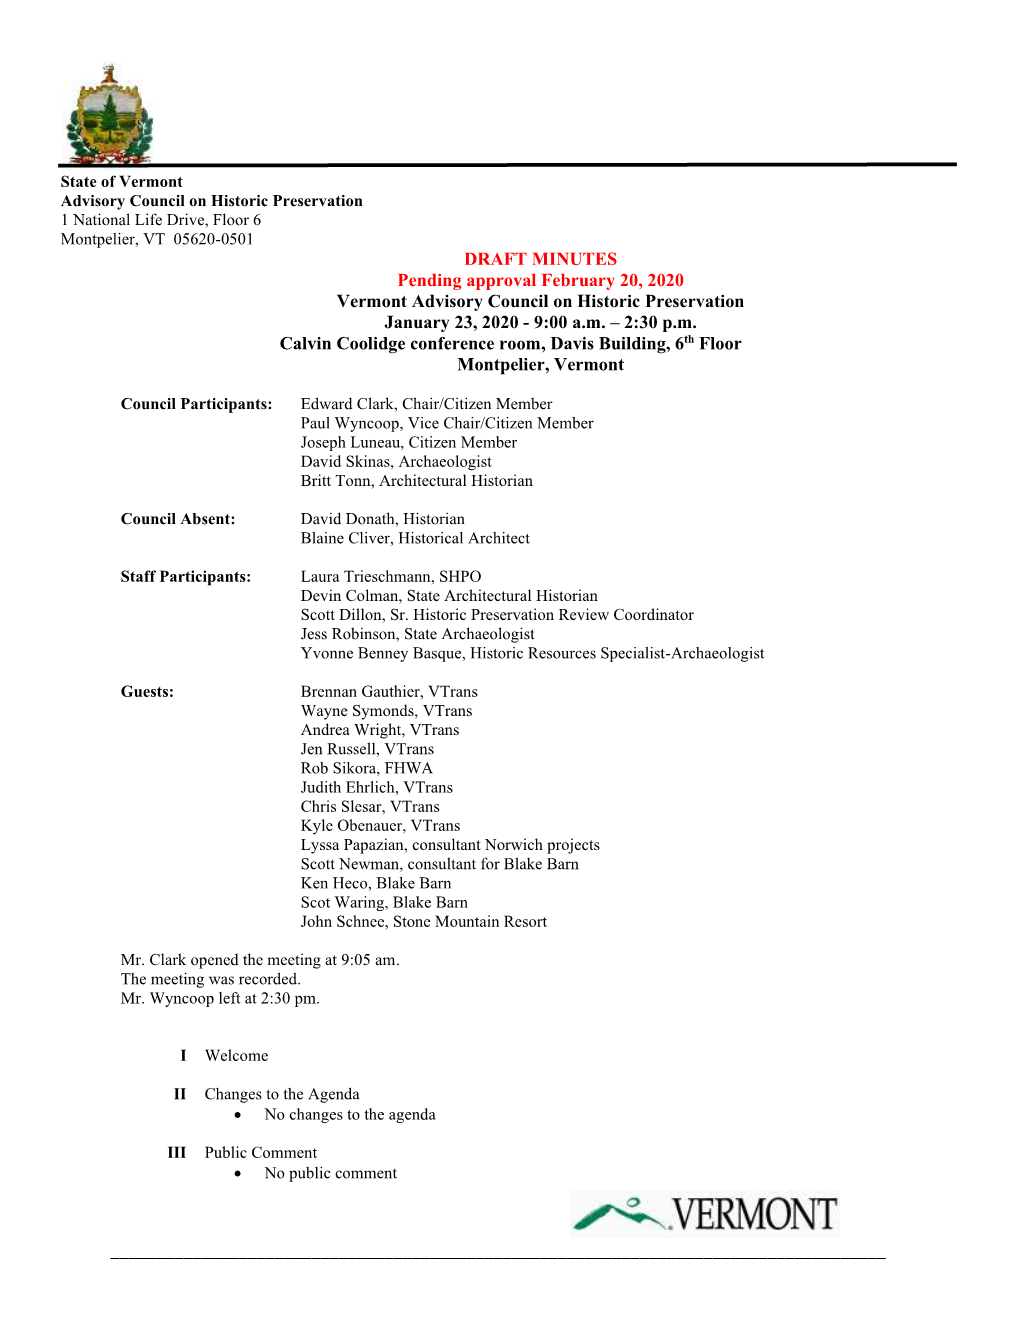 Review / Approve January 23, 2020 Meeting Minutes